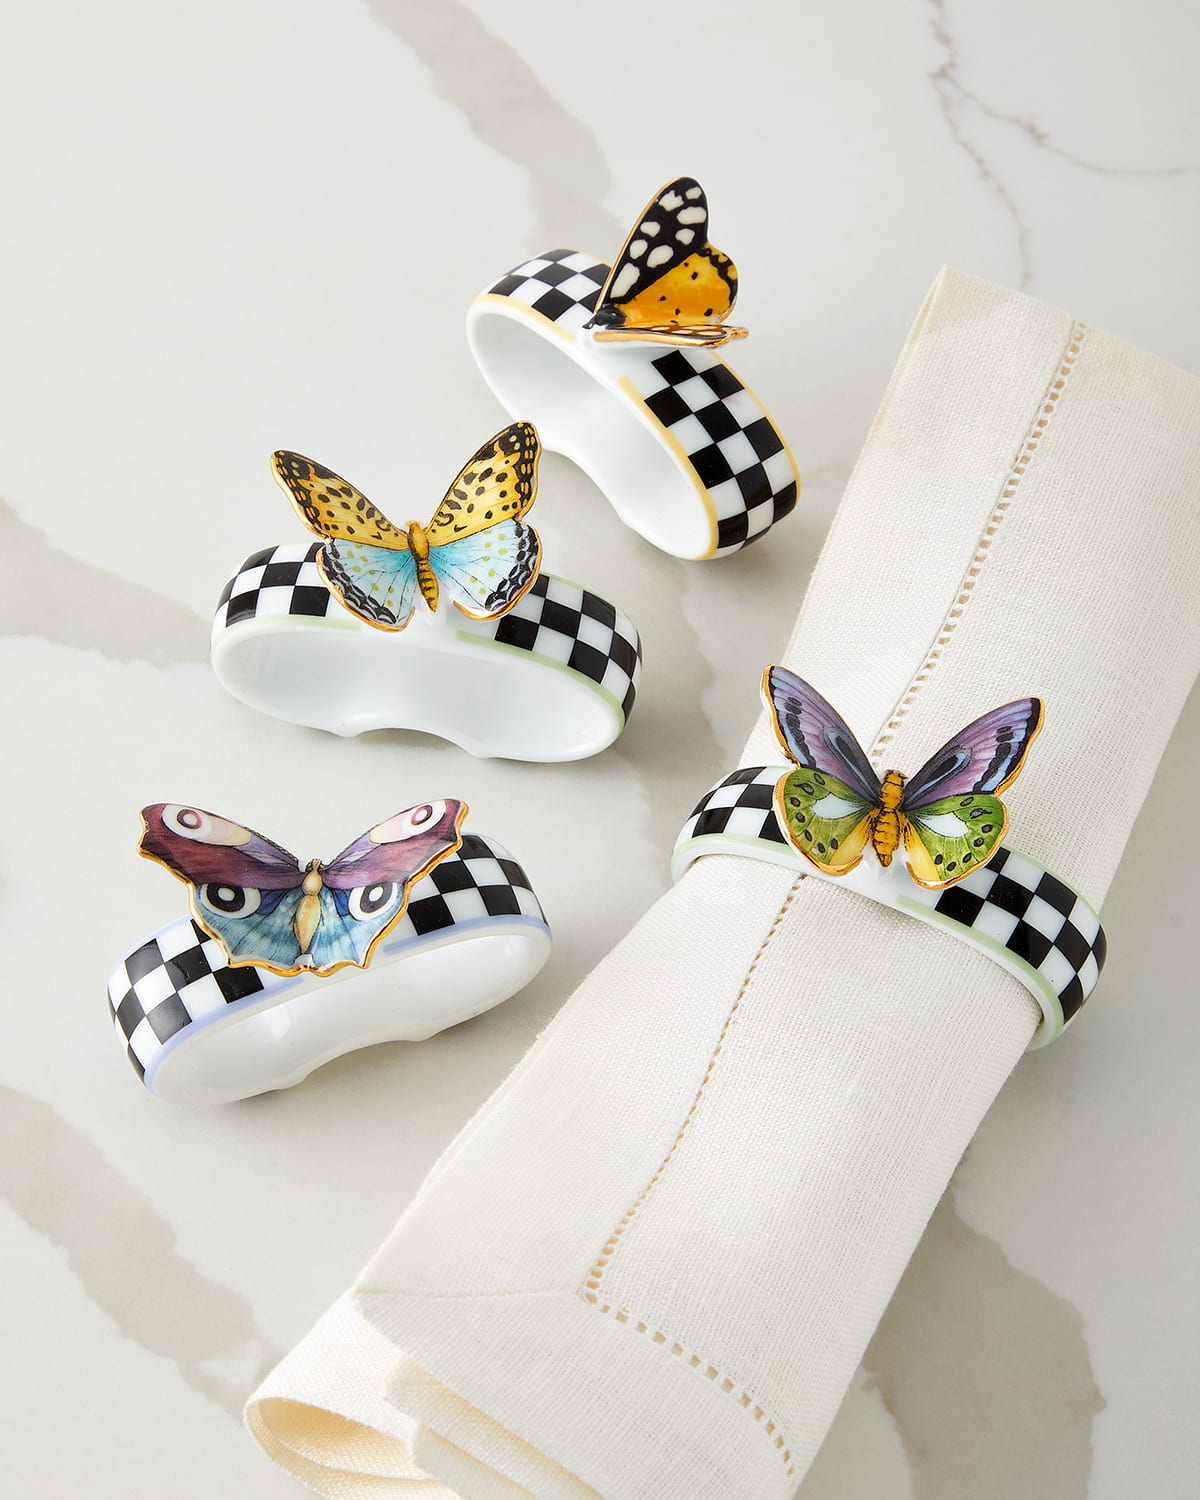 Mackenzie-childs Toile Butterfly Toile 4-piece Napkin Rings Set In Multi